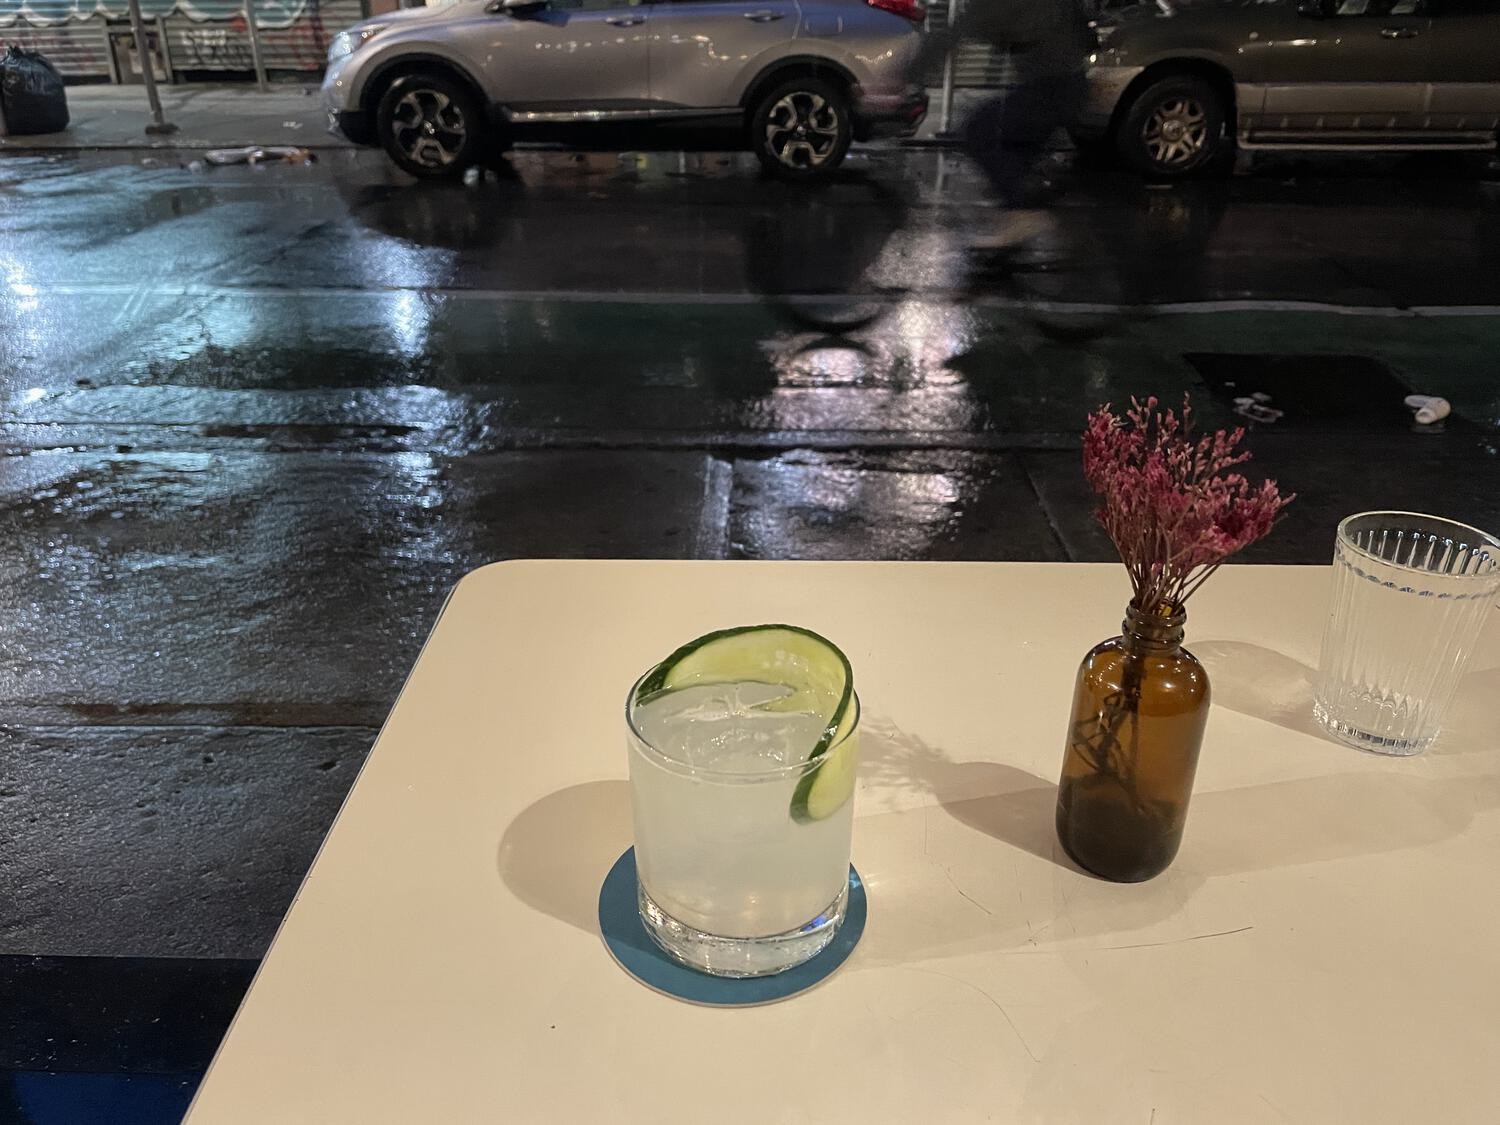 A cocktail and table setting on a table outdoors with a very wet street behind it